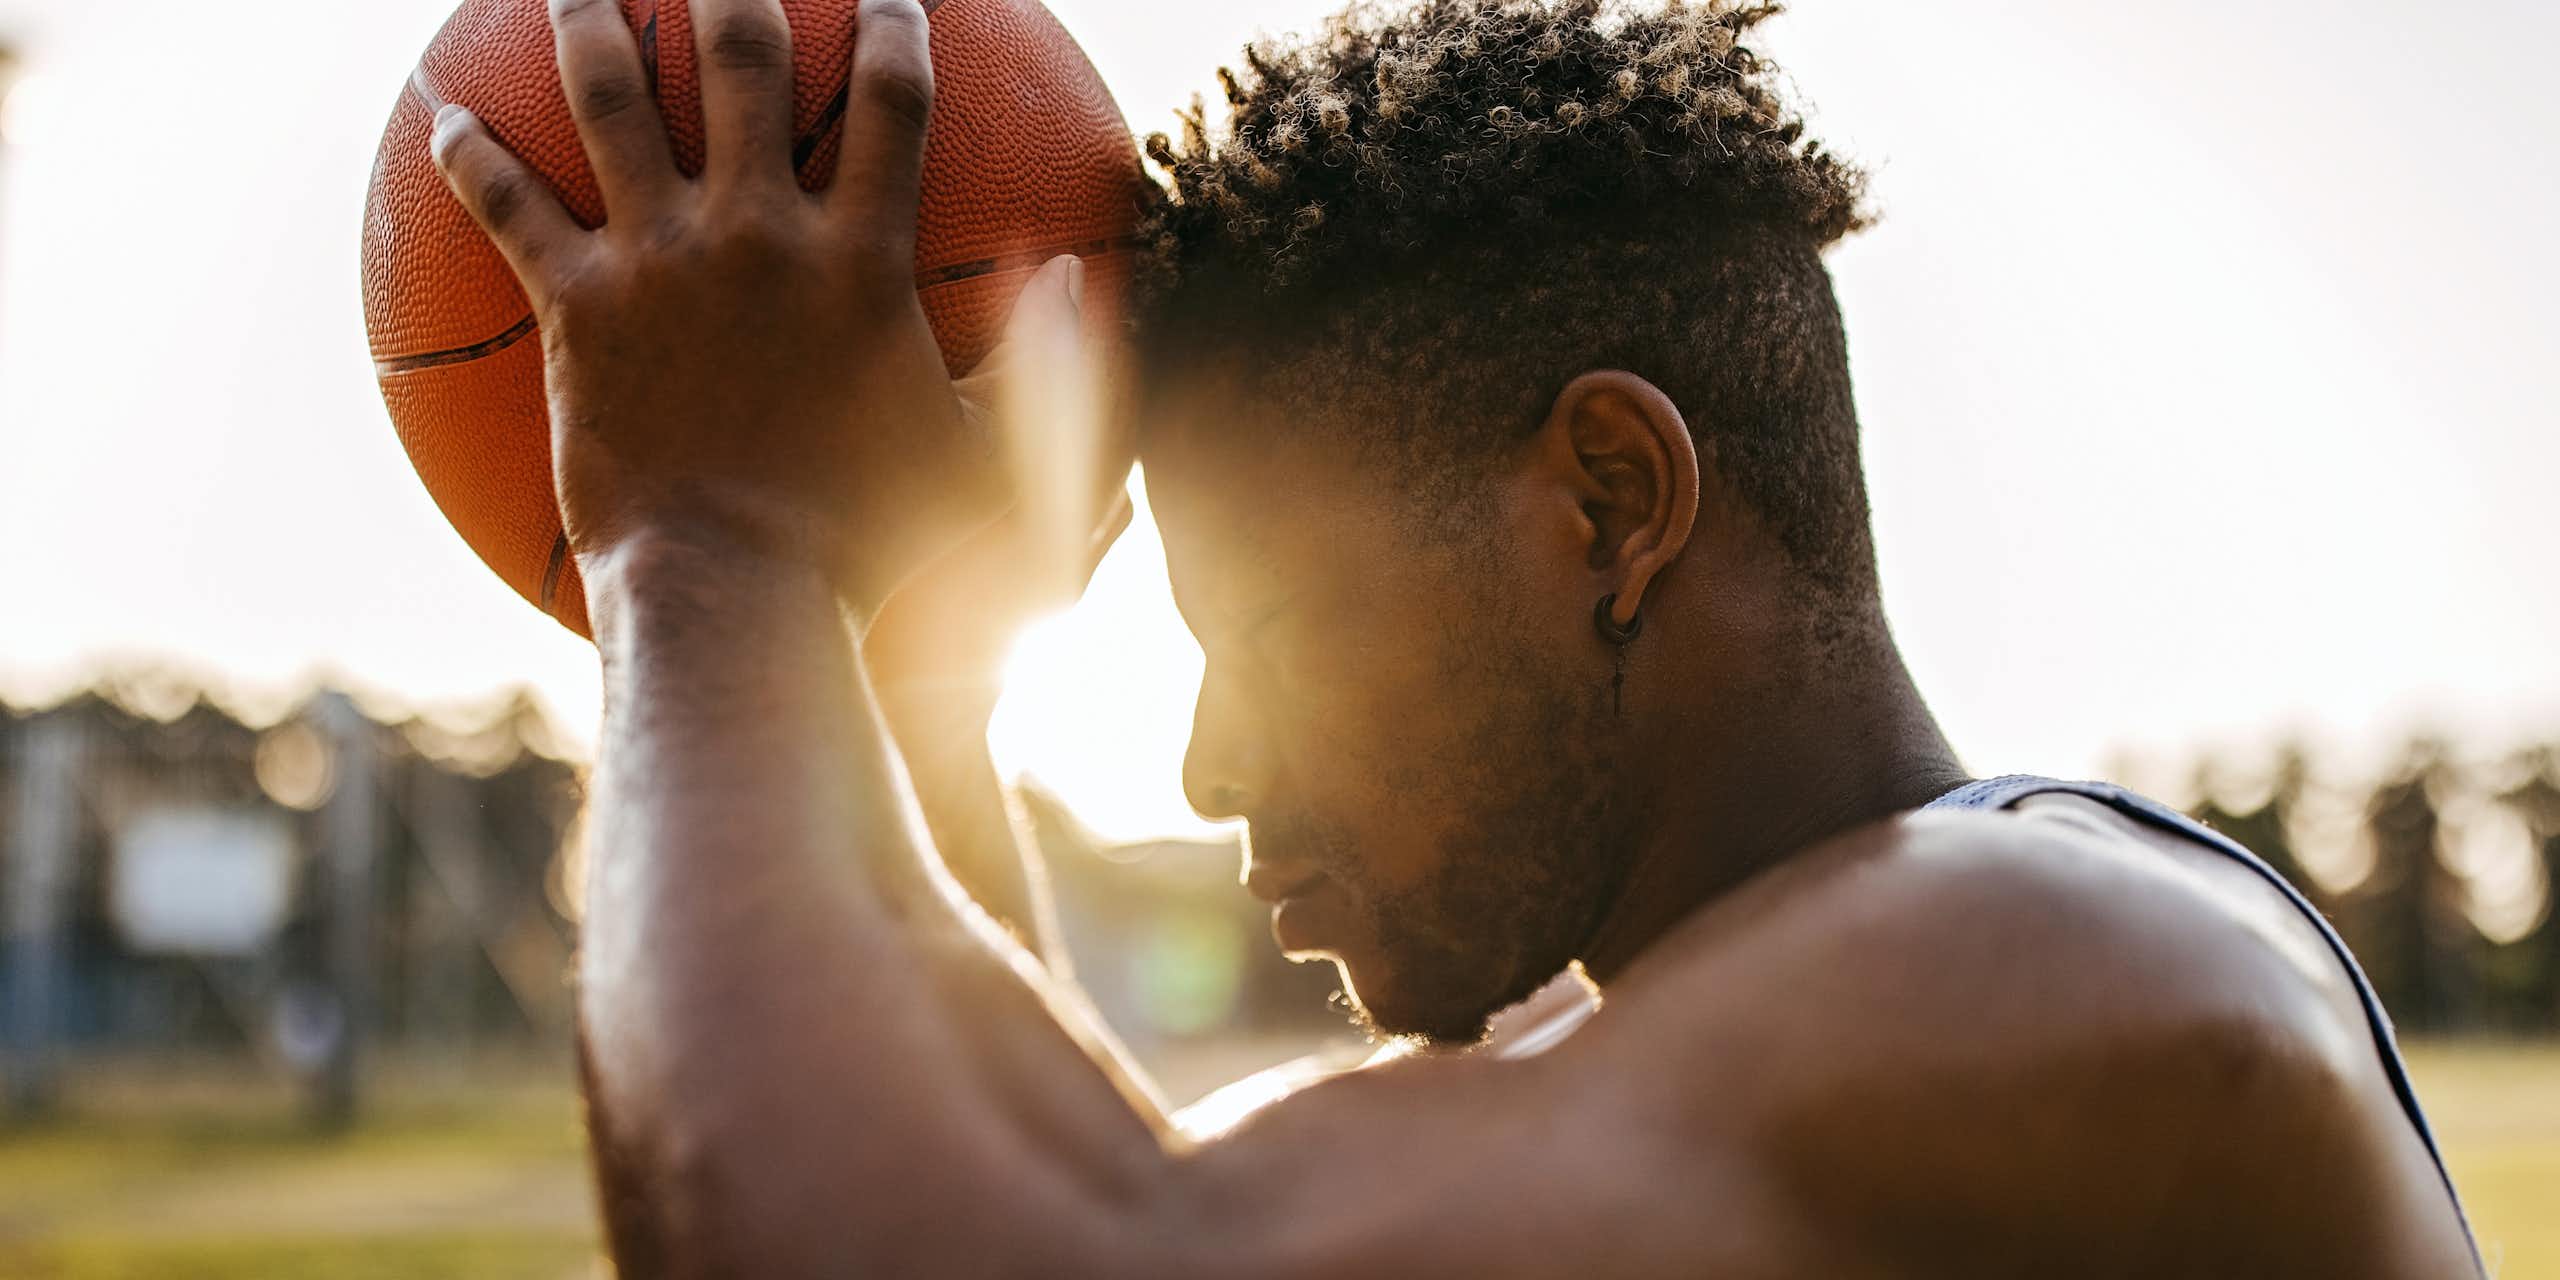 Young man wearing jersey holds basketball against forehead